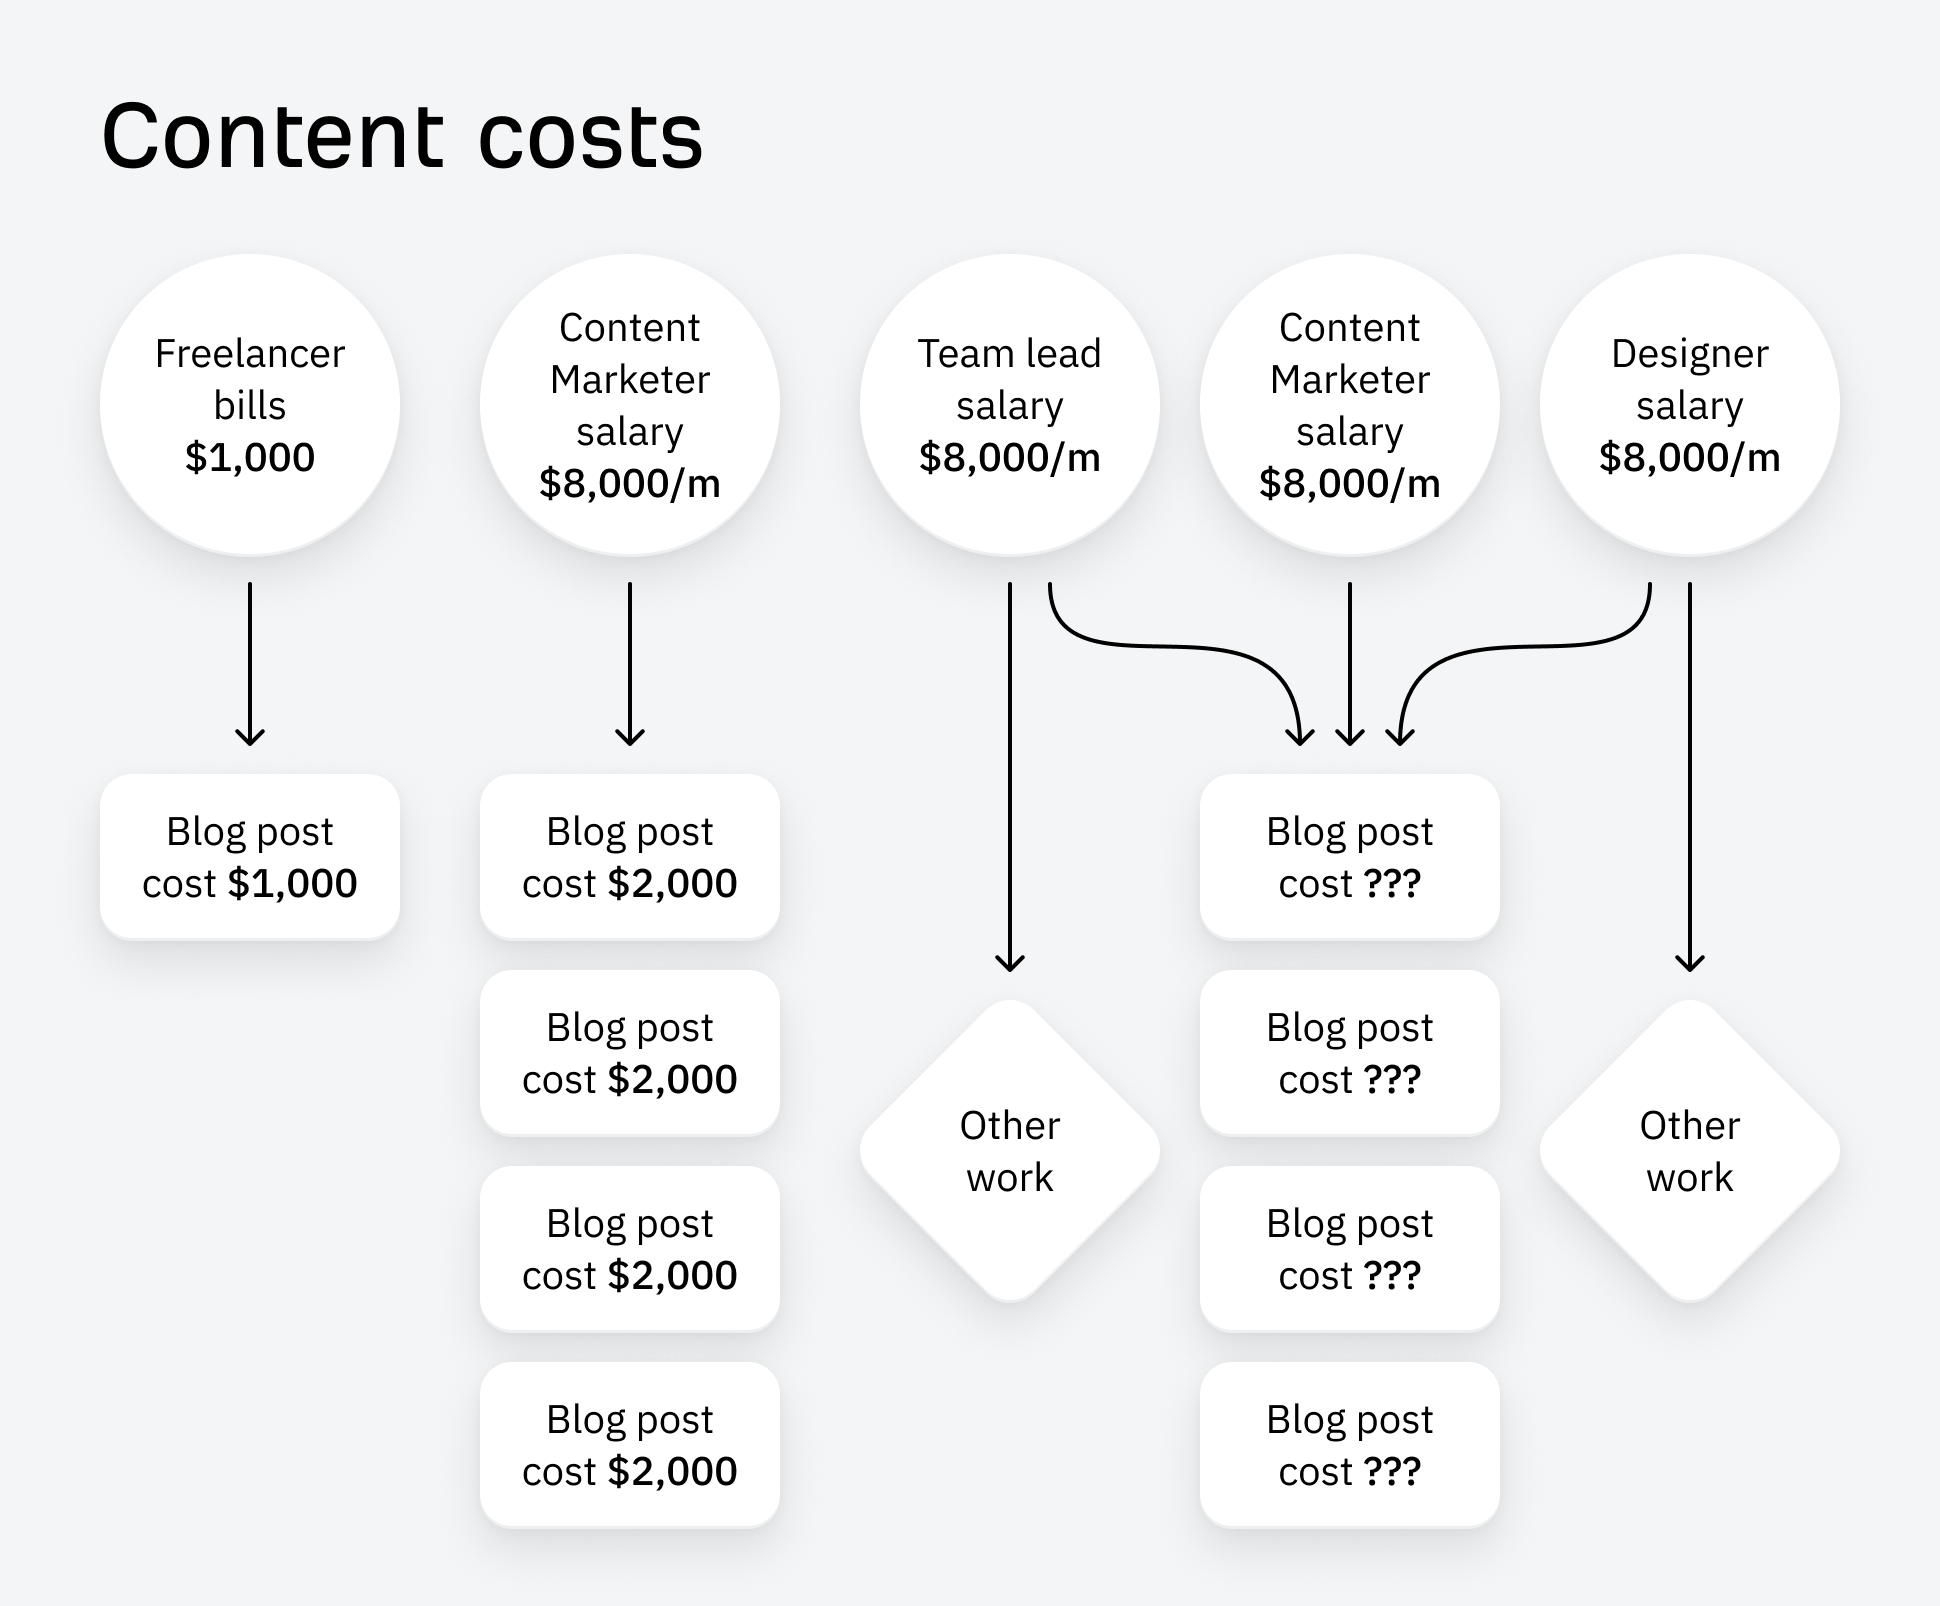 contents costs